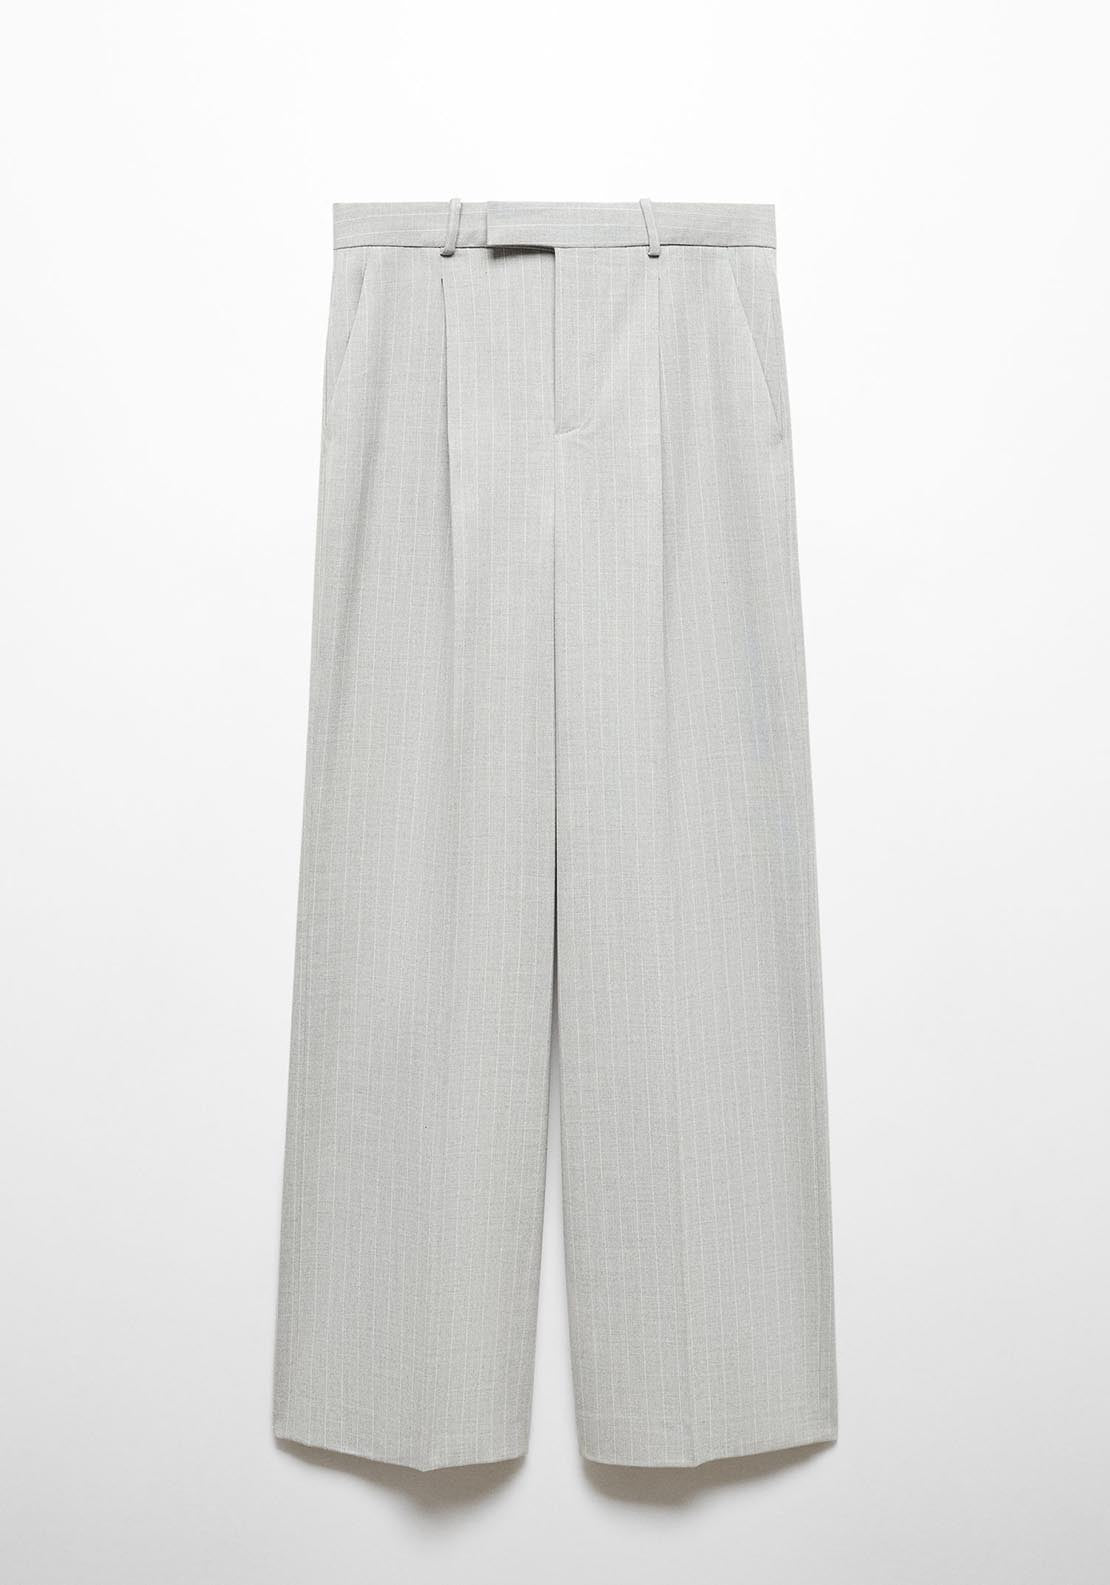 Mango Pinstripe suit trousers 7 Shaws Department Stores